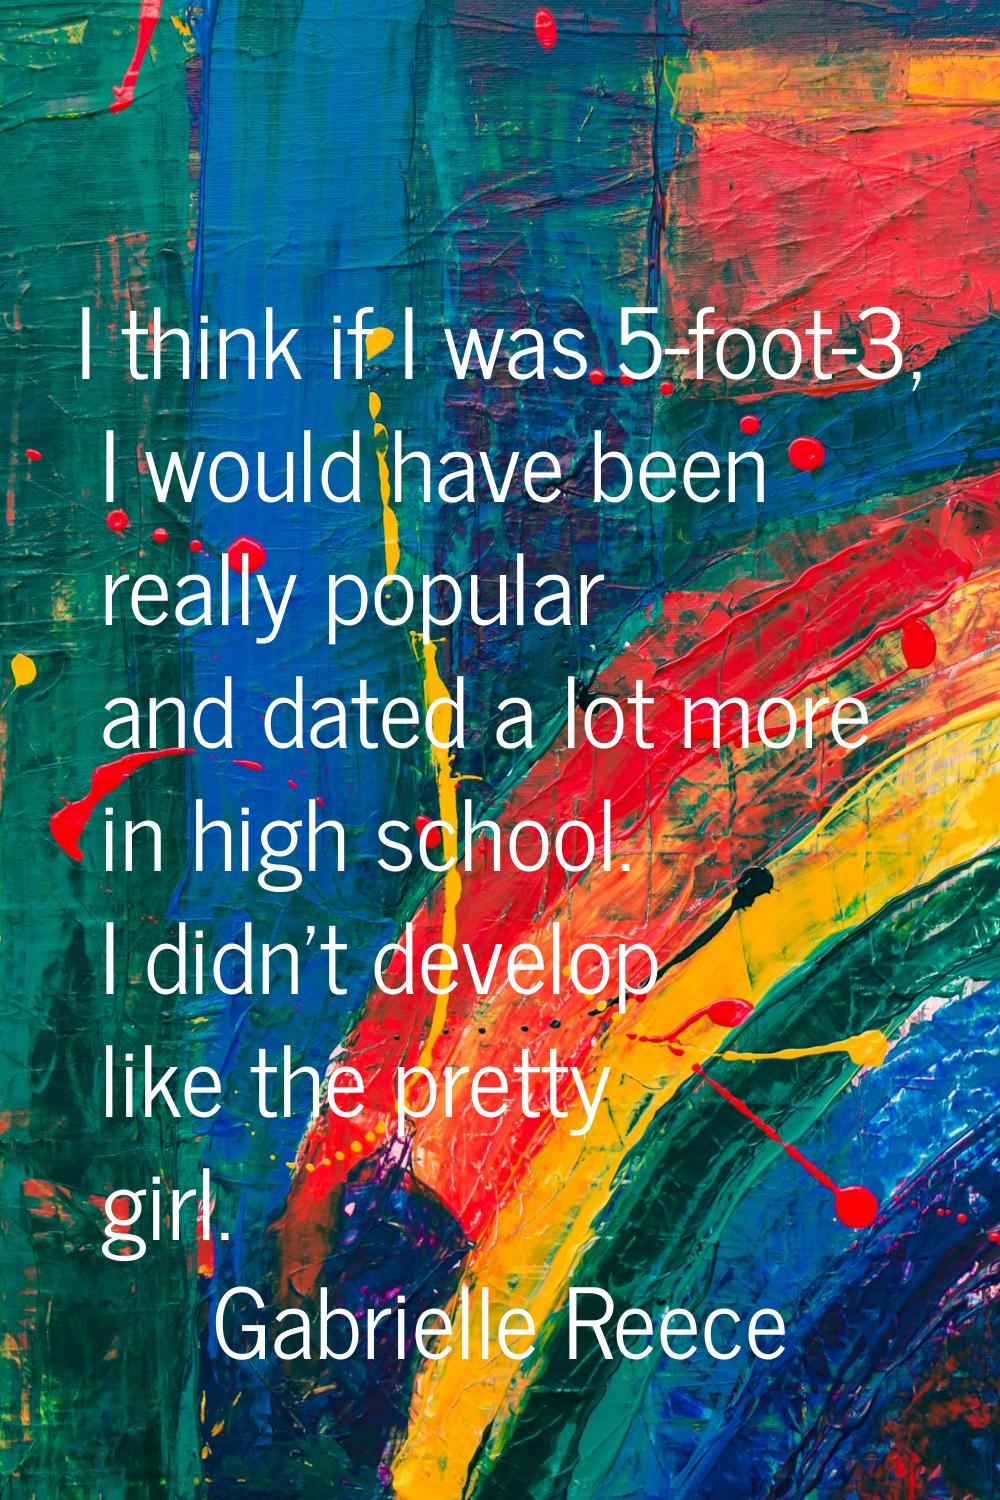 I think if I was 5-foot-3, I would have been really popular and dated a lot more in high school. I 